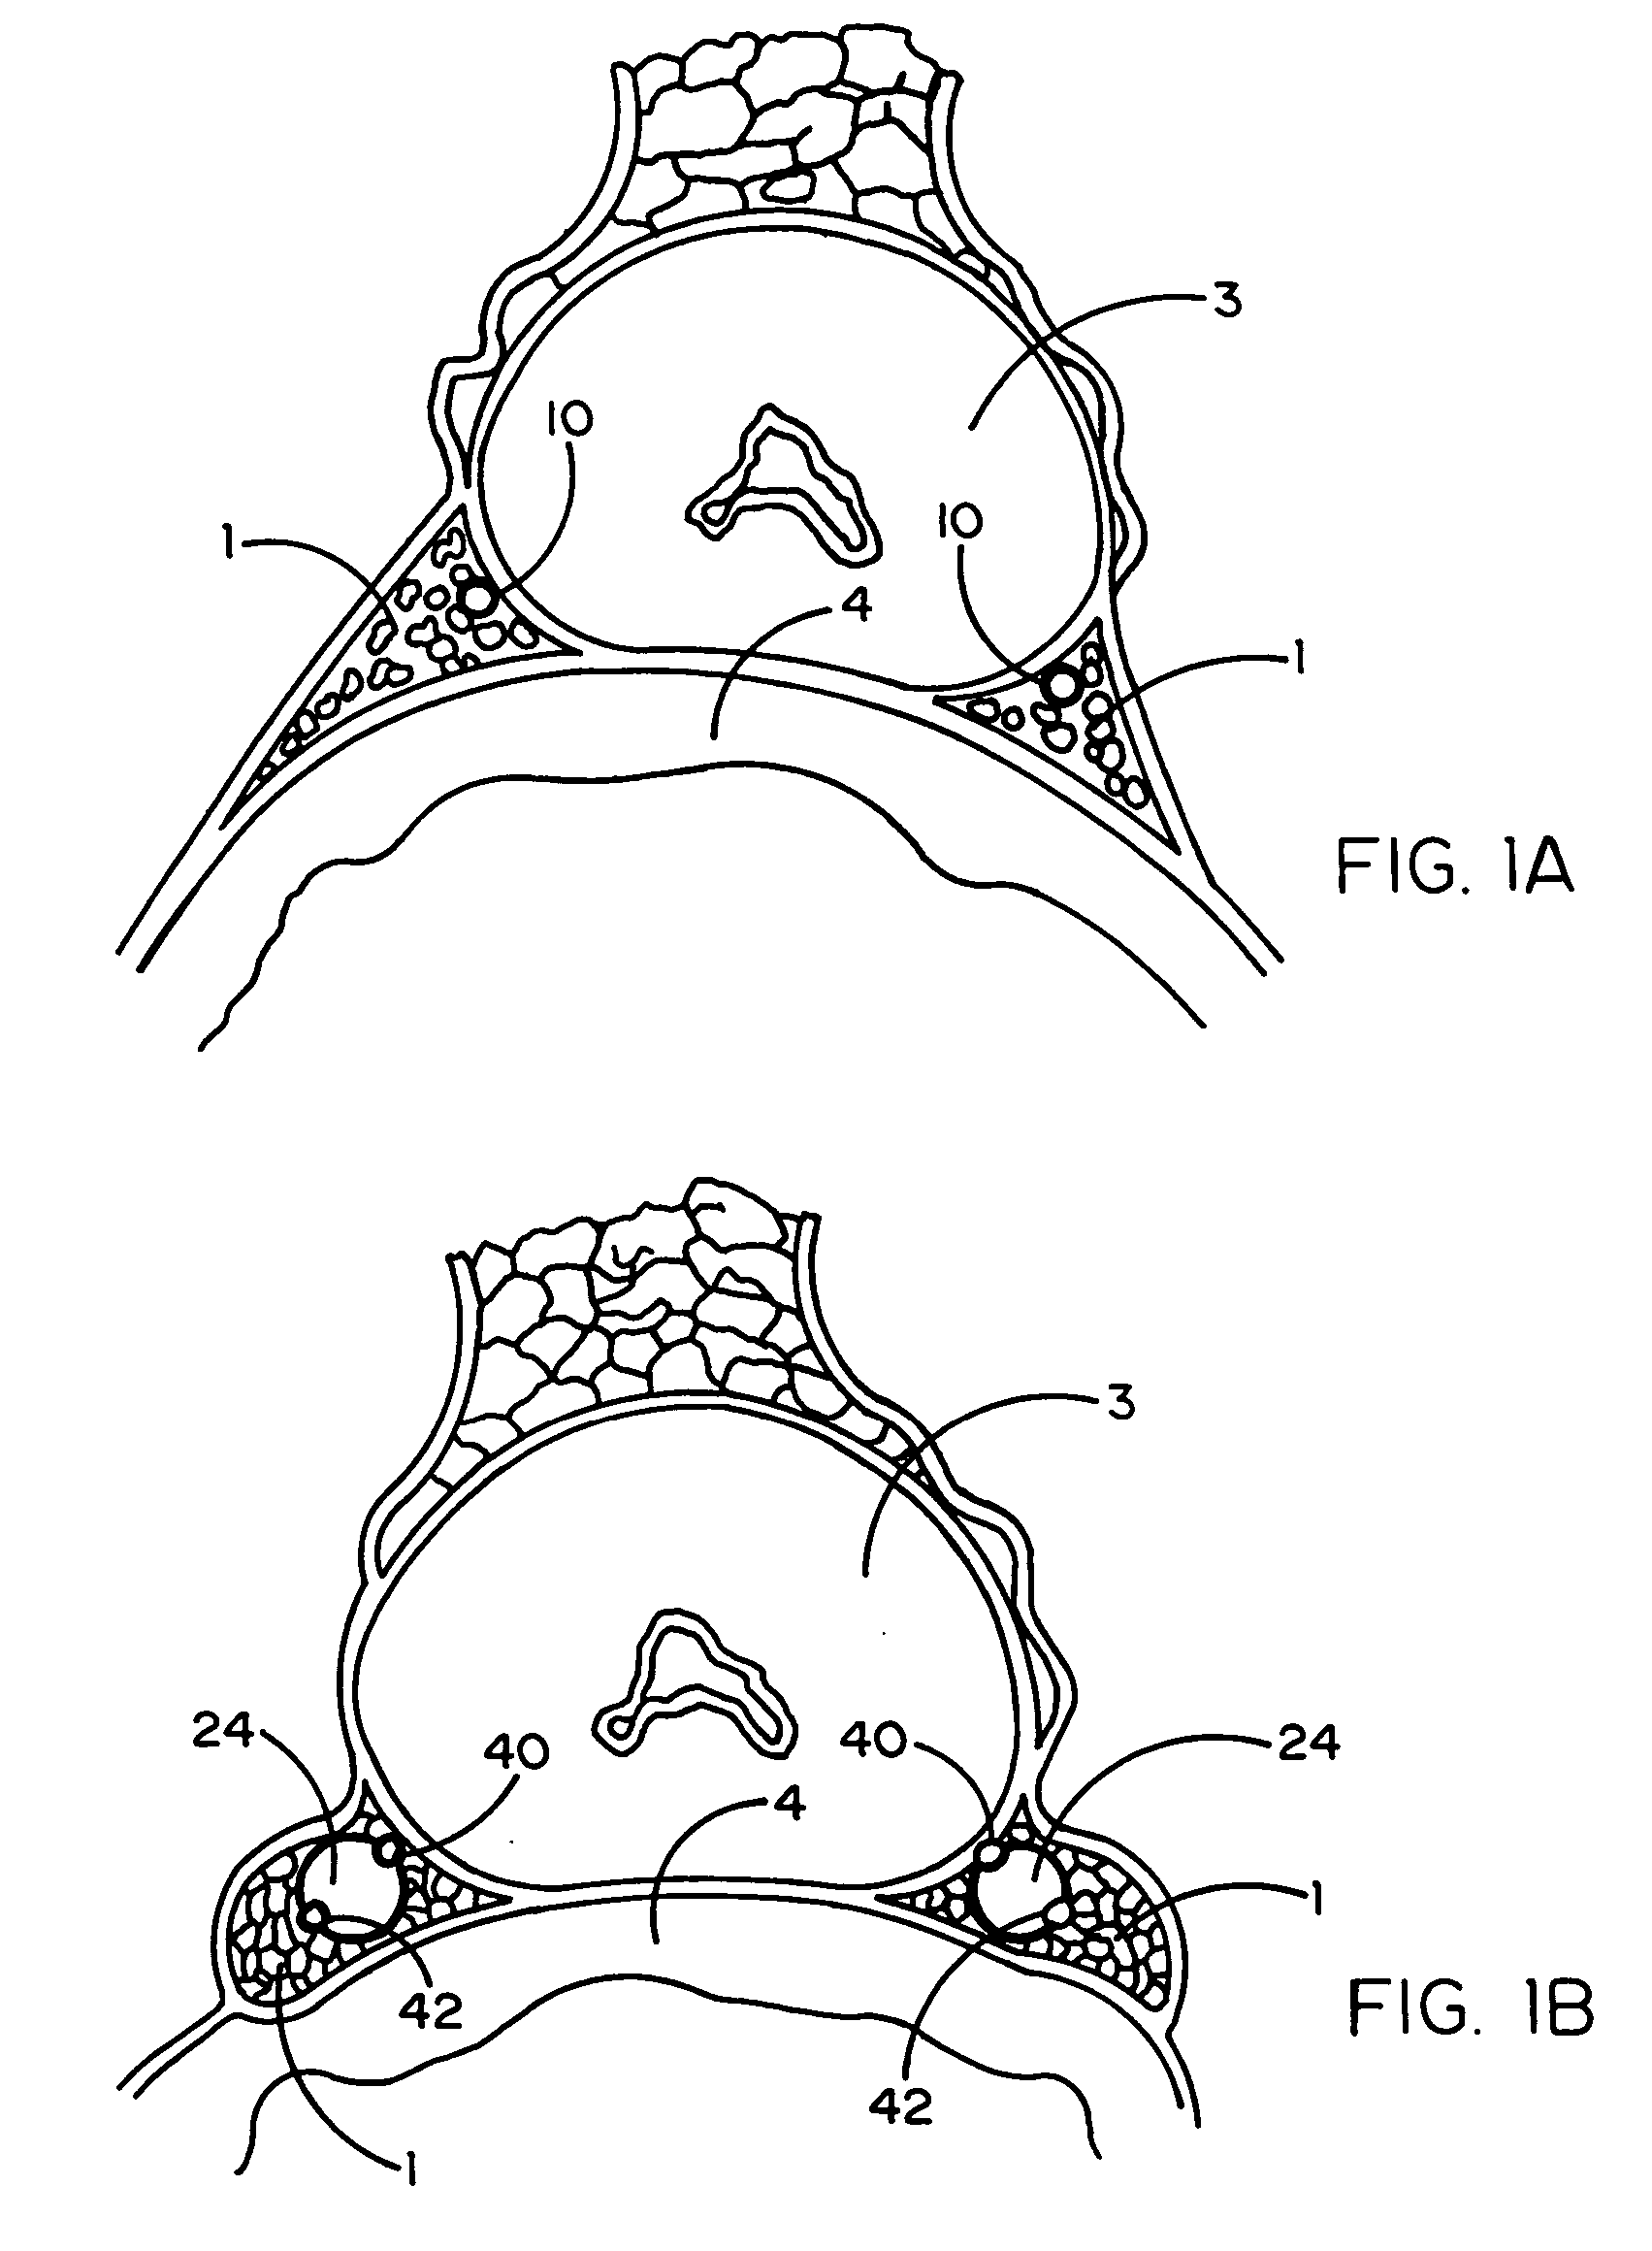 Tissue protective system and method for thermoablative therapies